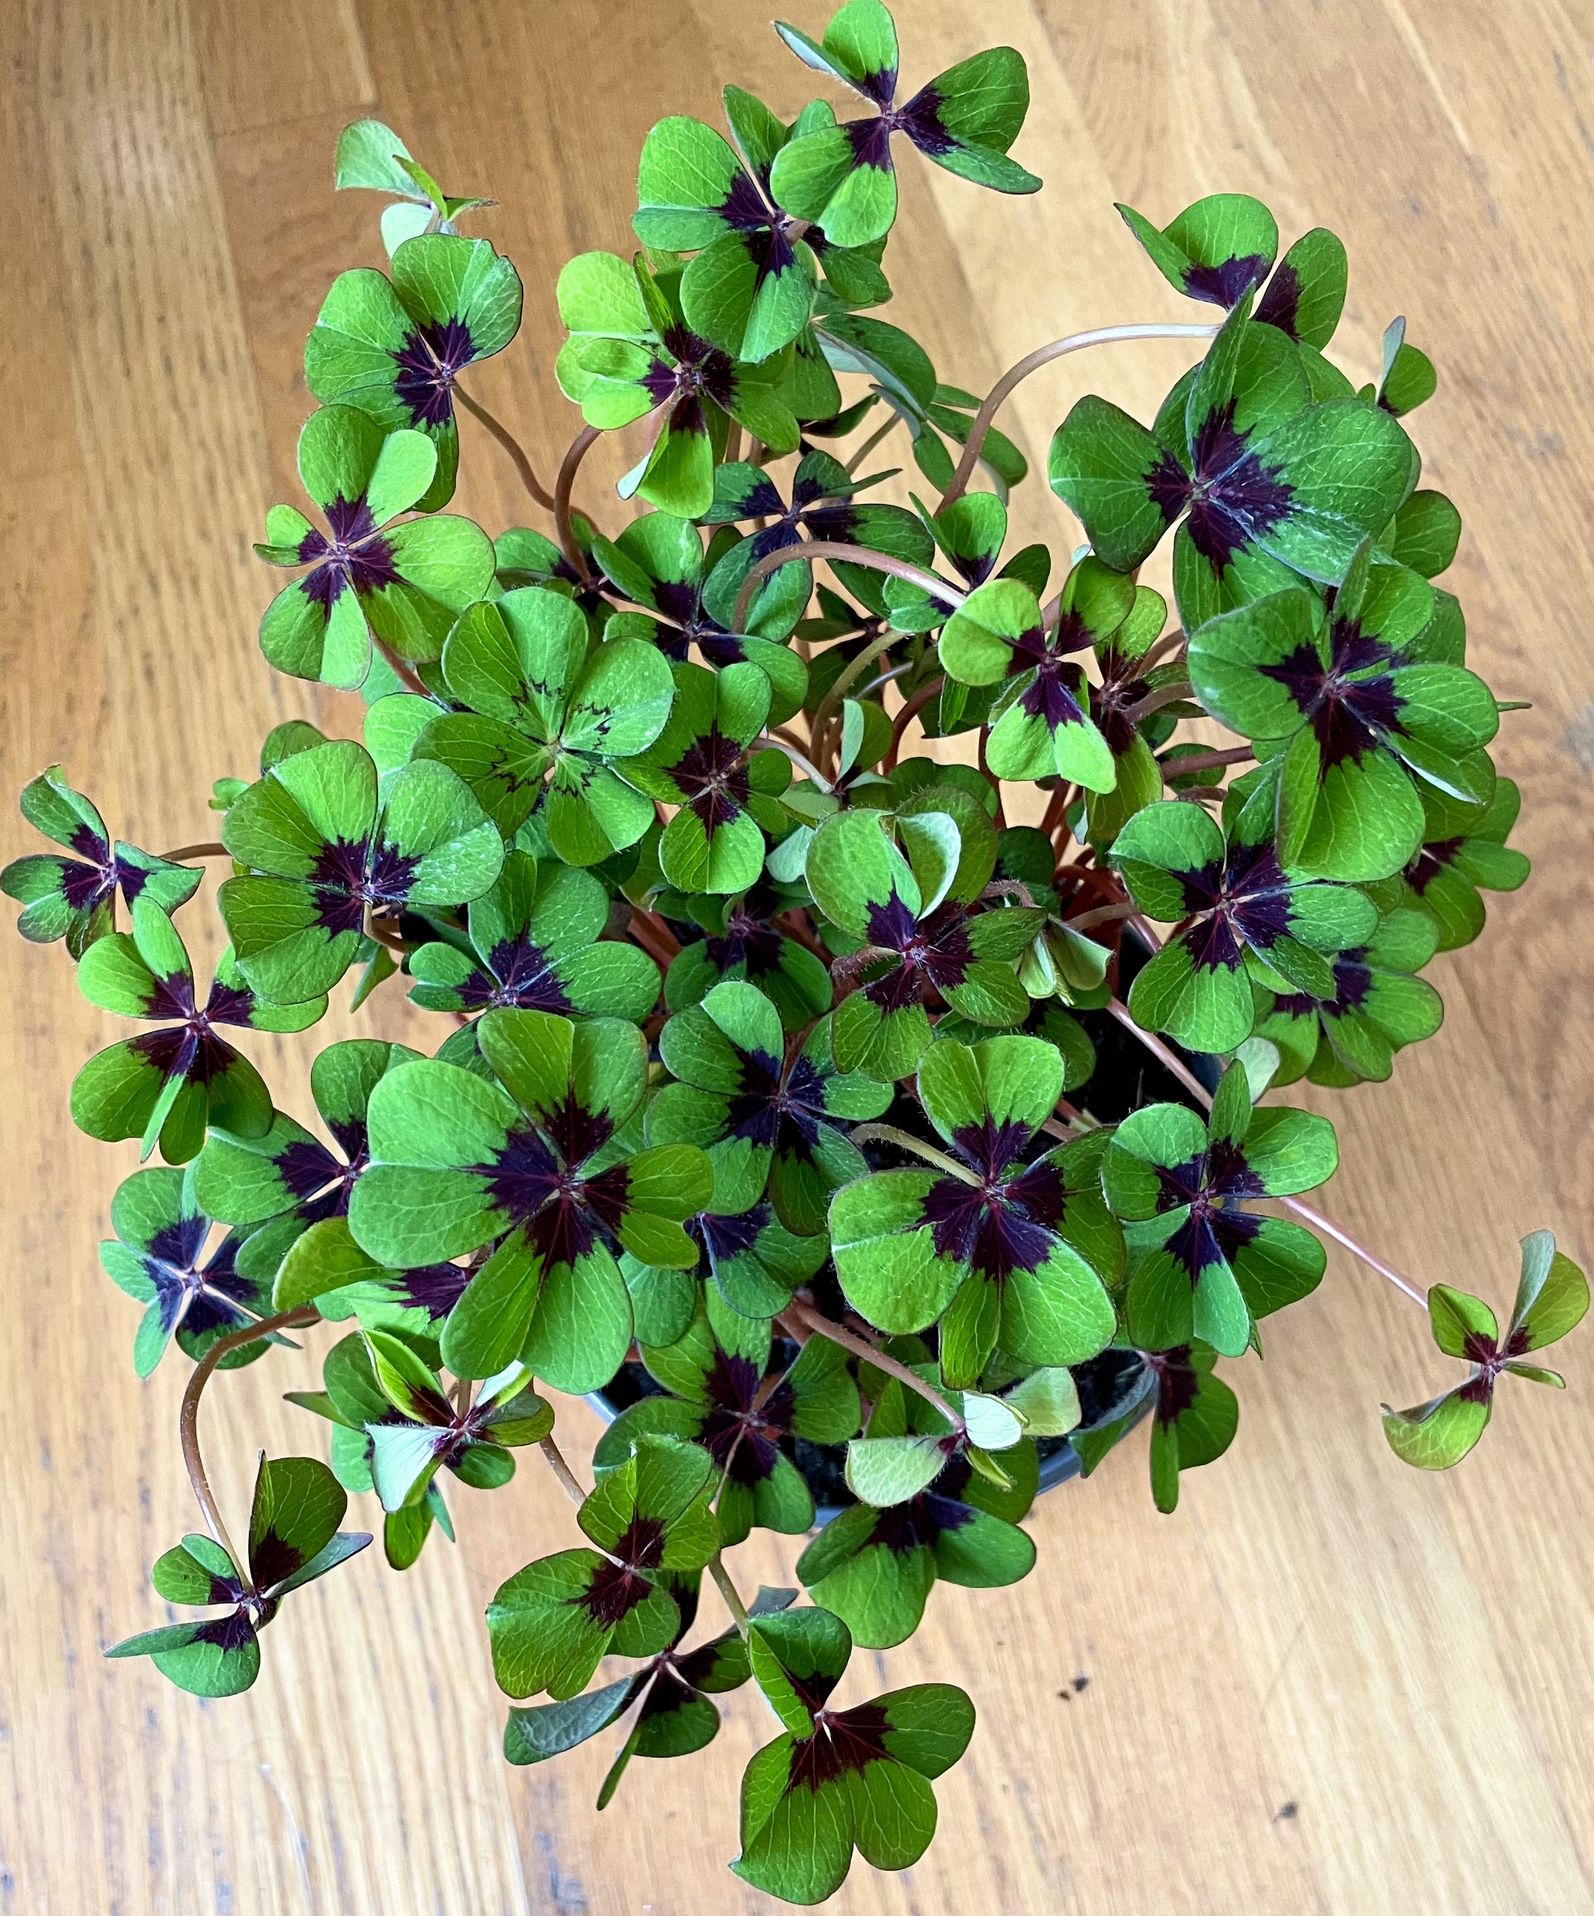 Oxalis Iron Cross / Good Luck 🍀 Plant in 6in. Pot / Free Delivery Available 